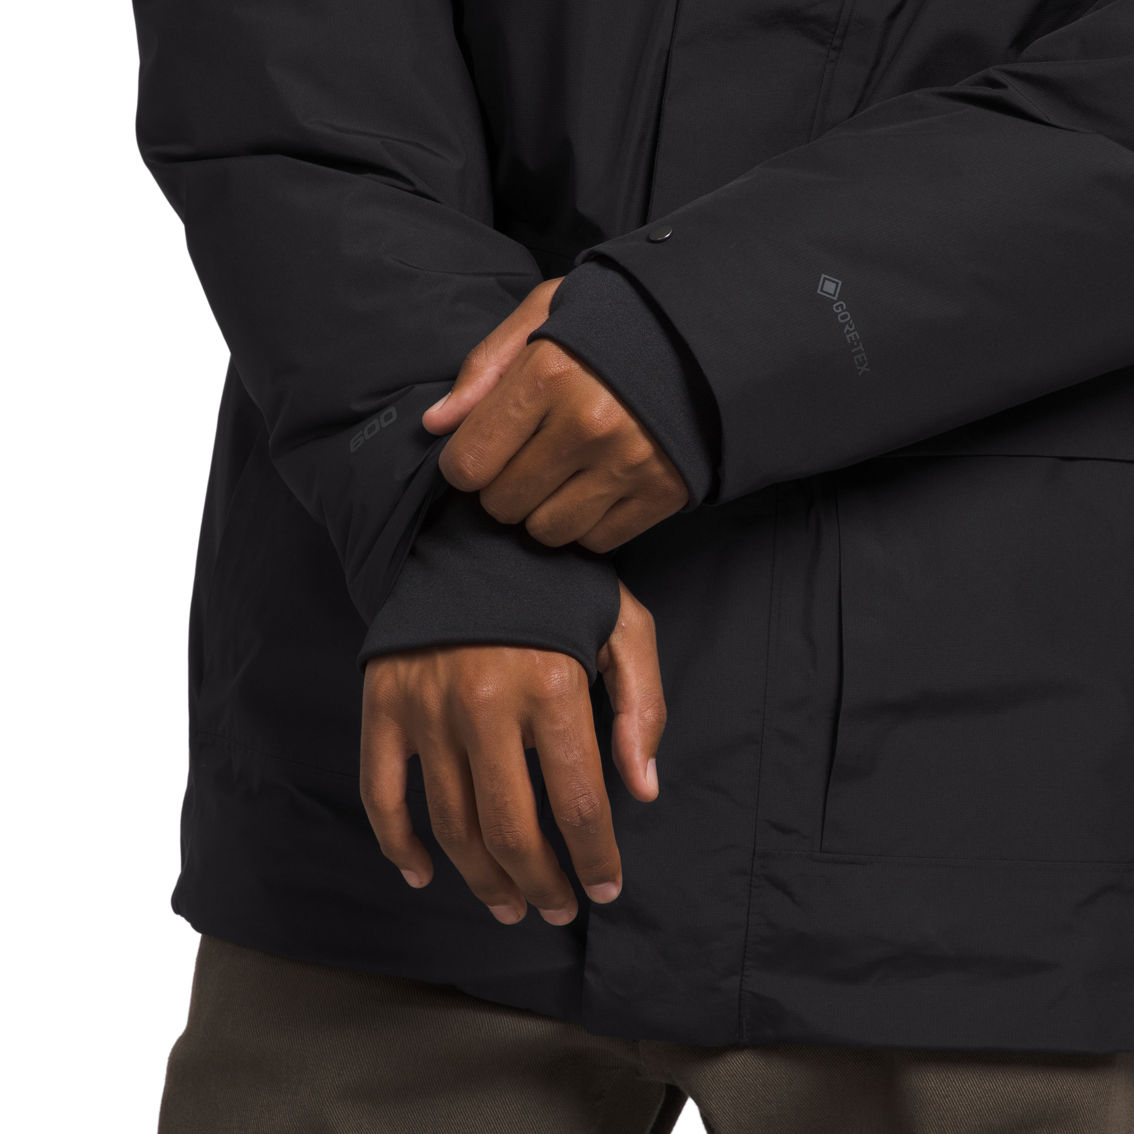 The North Face Arctic Parka GTX Jacket - Image 6 of 6